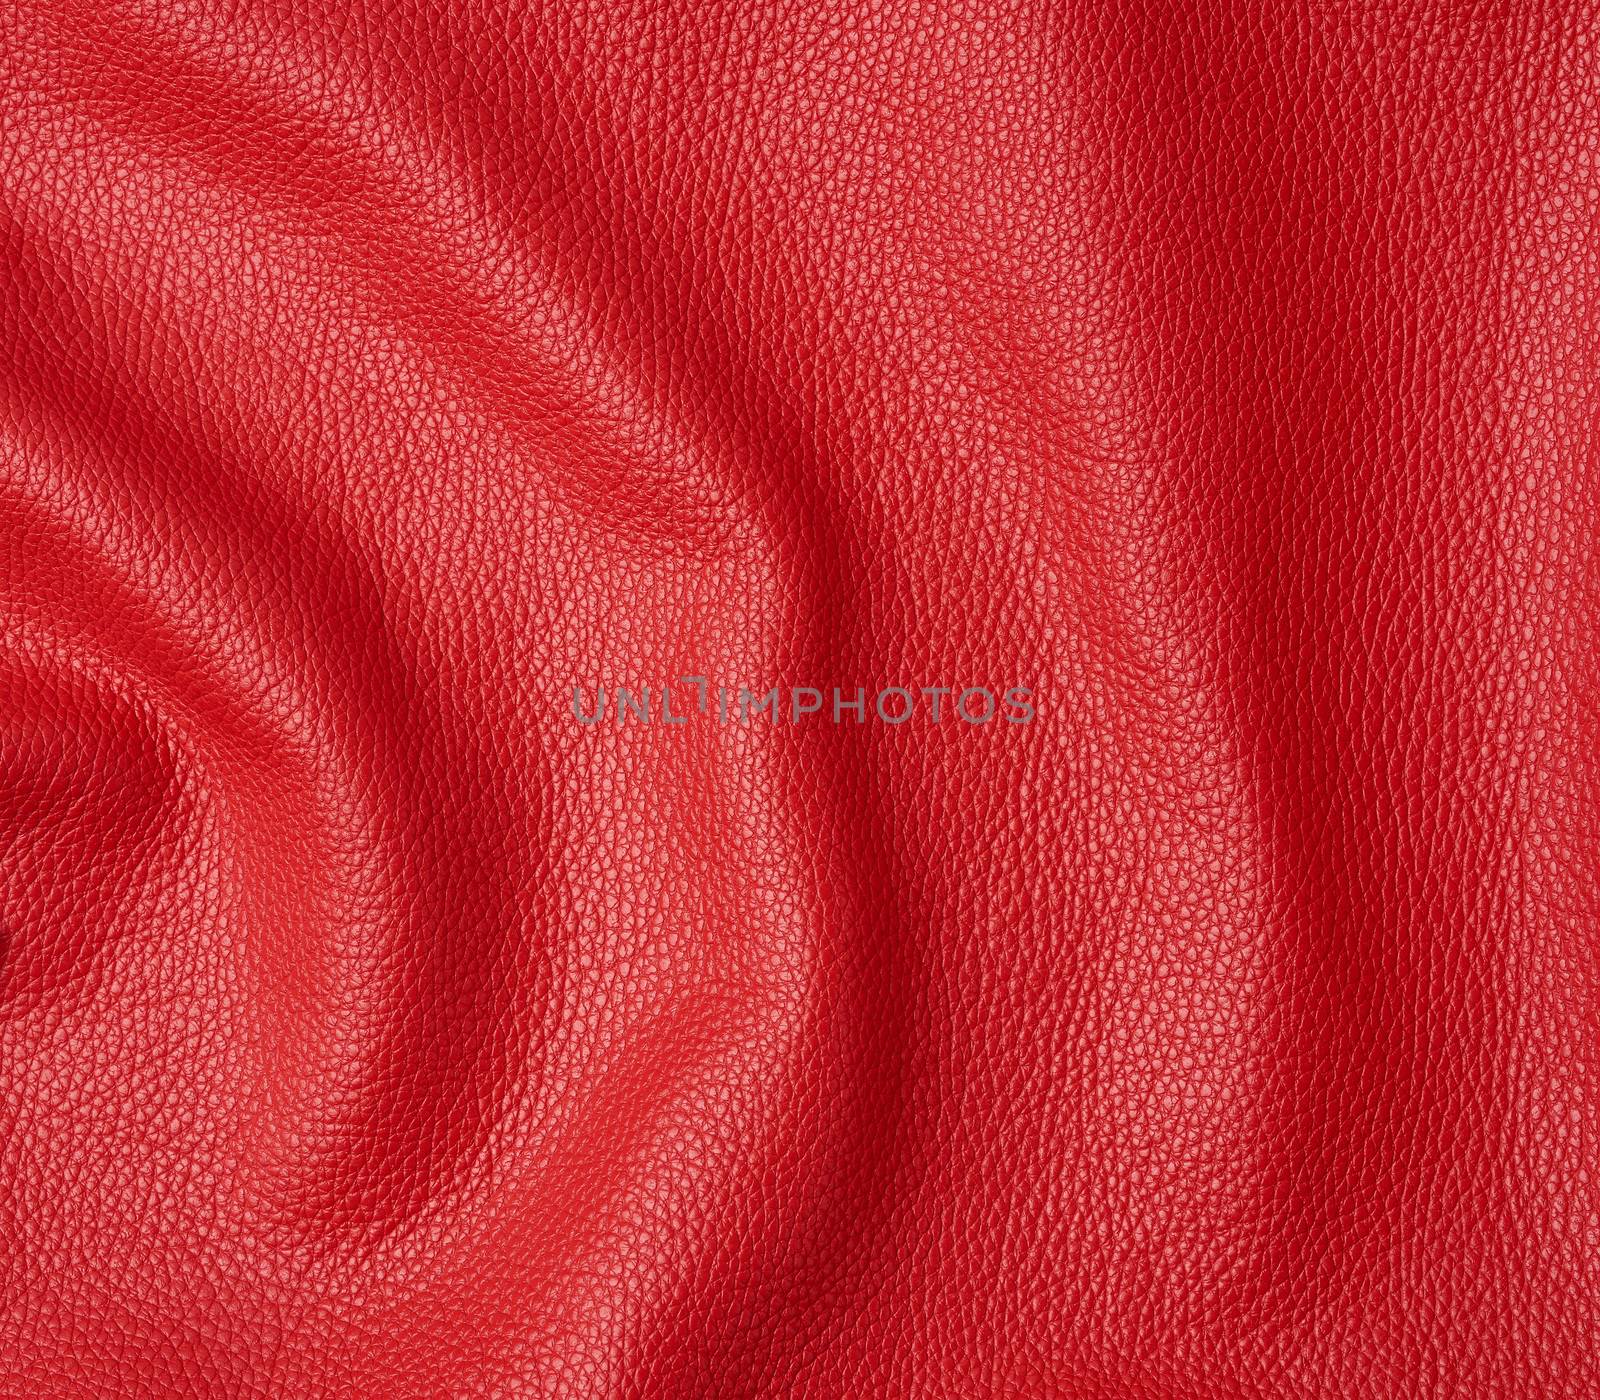 natural bright red cowhide texture, full frame, scarlet color, close up